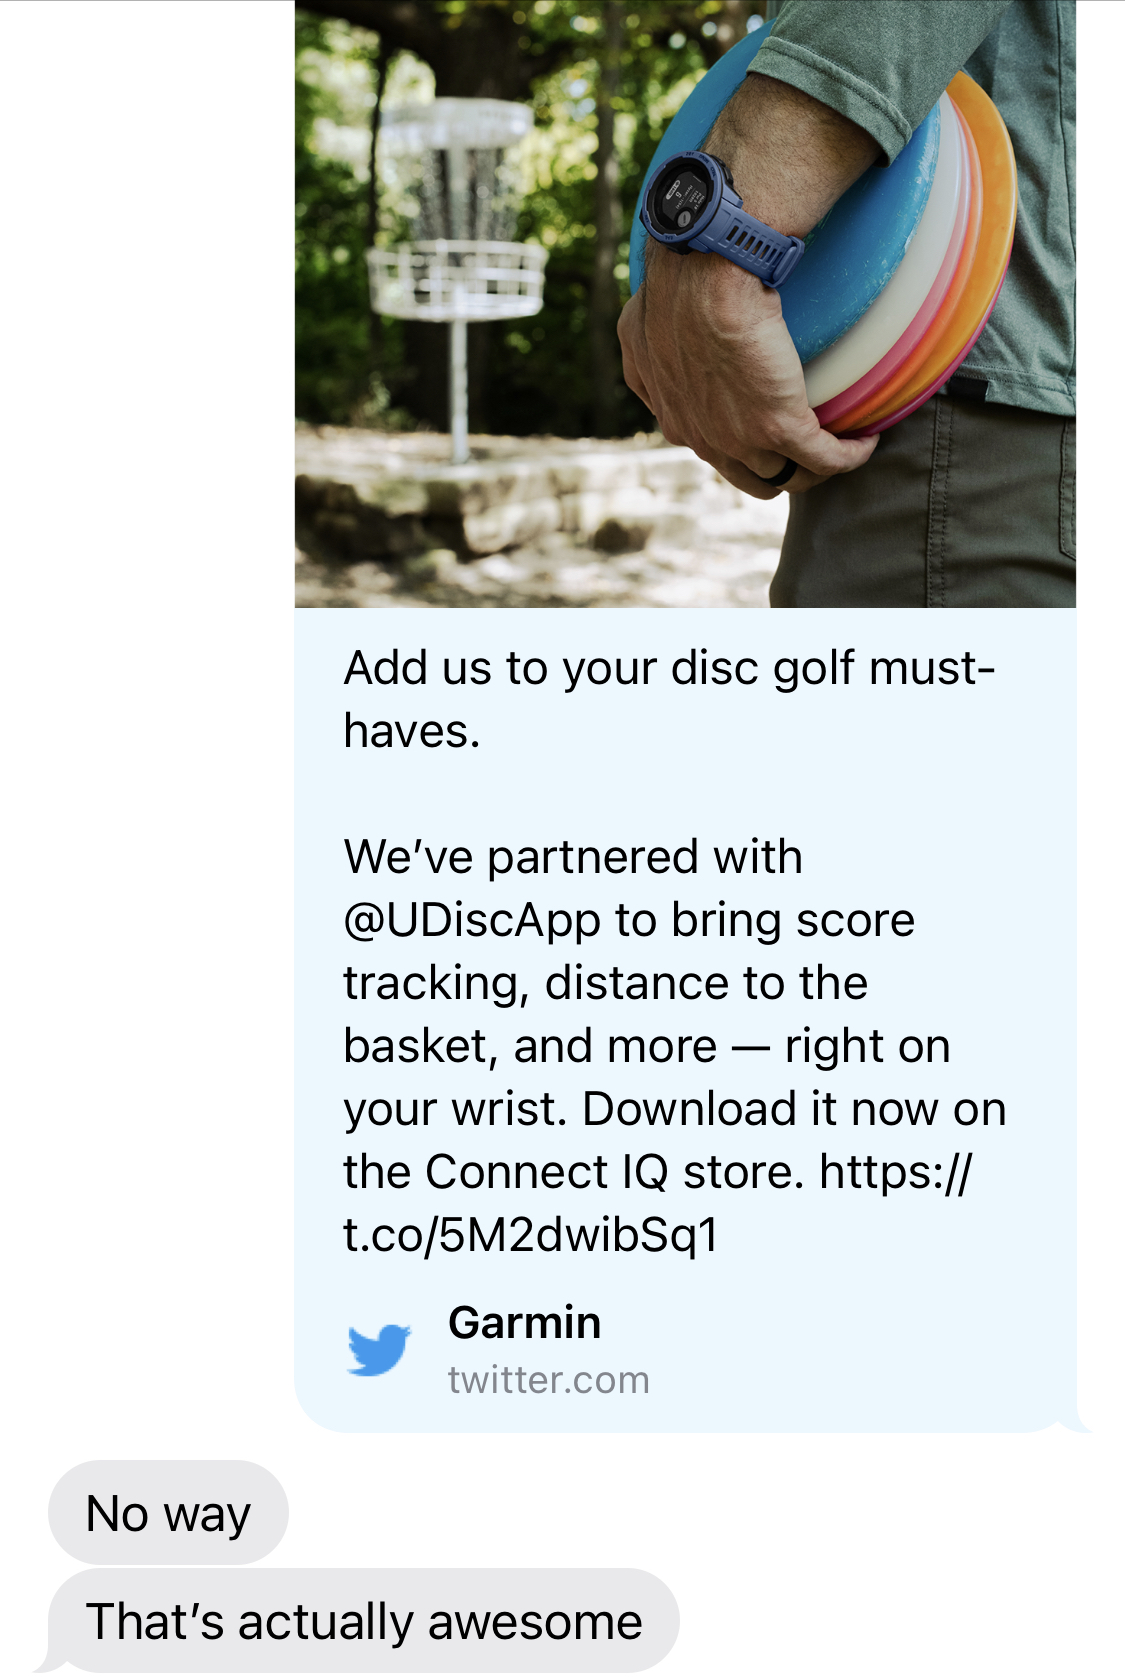 Banyan Tage af tit Garmin on Twitter: "Add us to your disc golf must-haves. We've partnered  with @UDiscApp to bring score tracking, distance to the basket, and more —  right on your wrist. Download it now